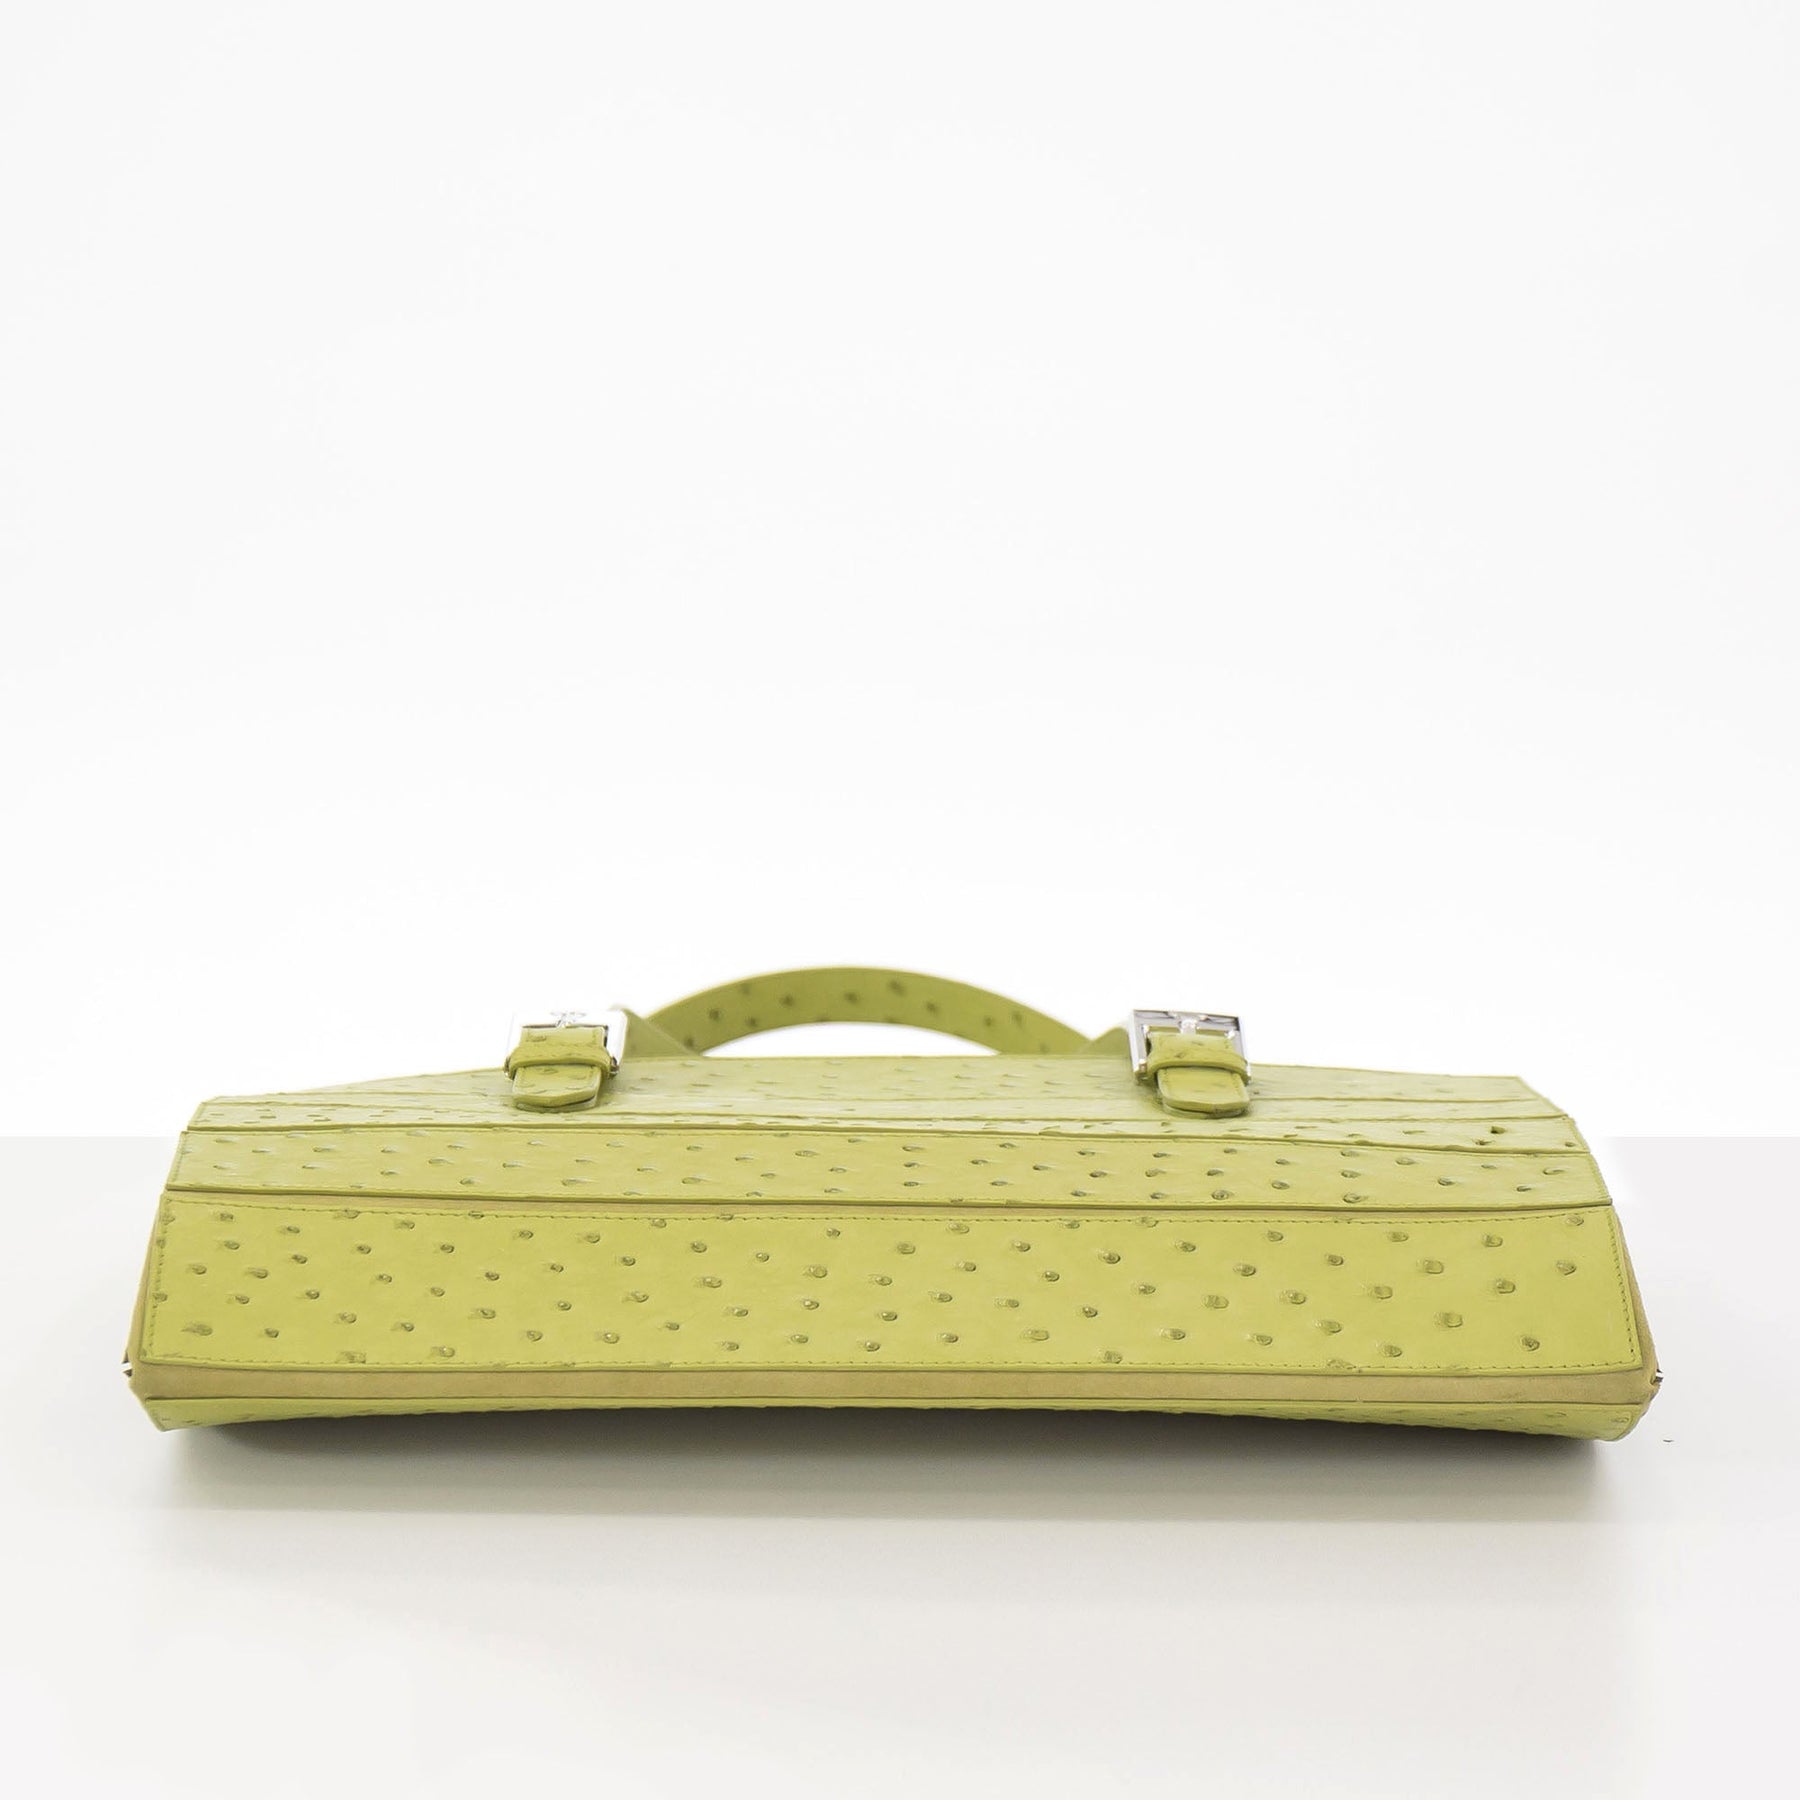 FLORA in Chartreuse Ostrich-DOTTI Luxury Handbags. Made in Italy